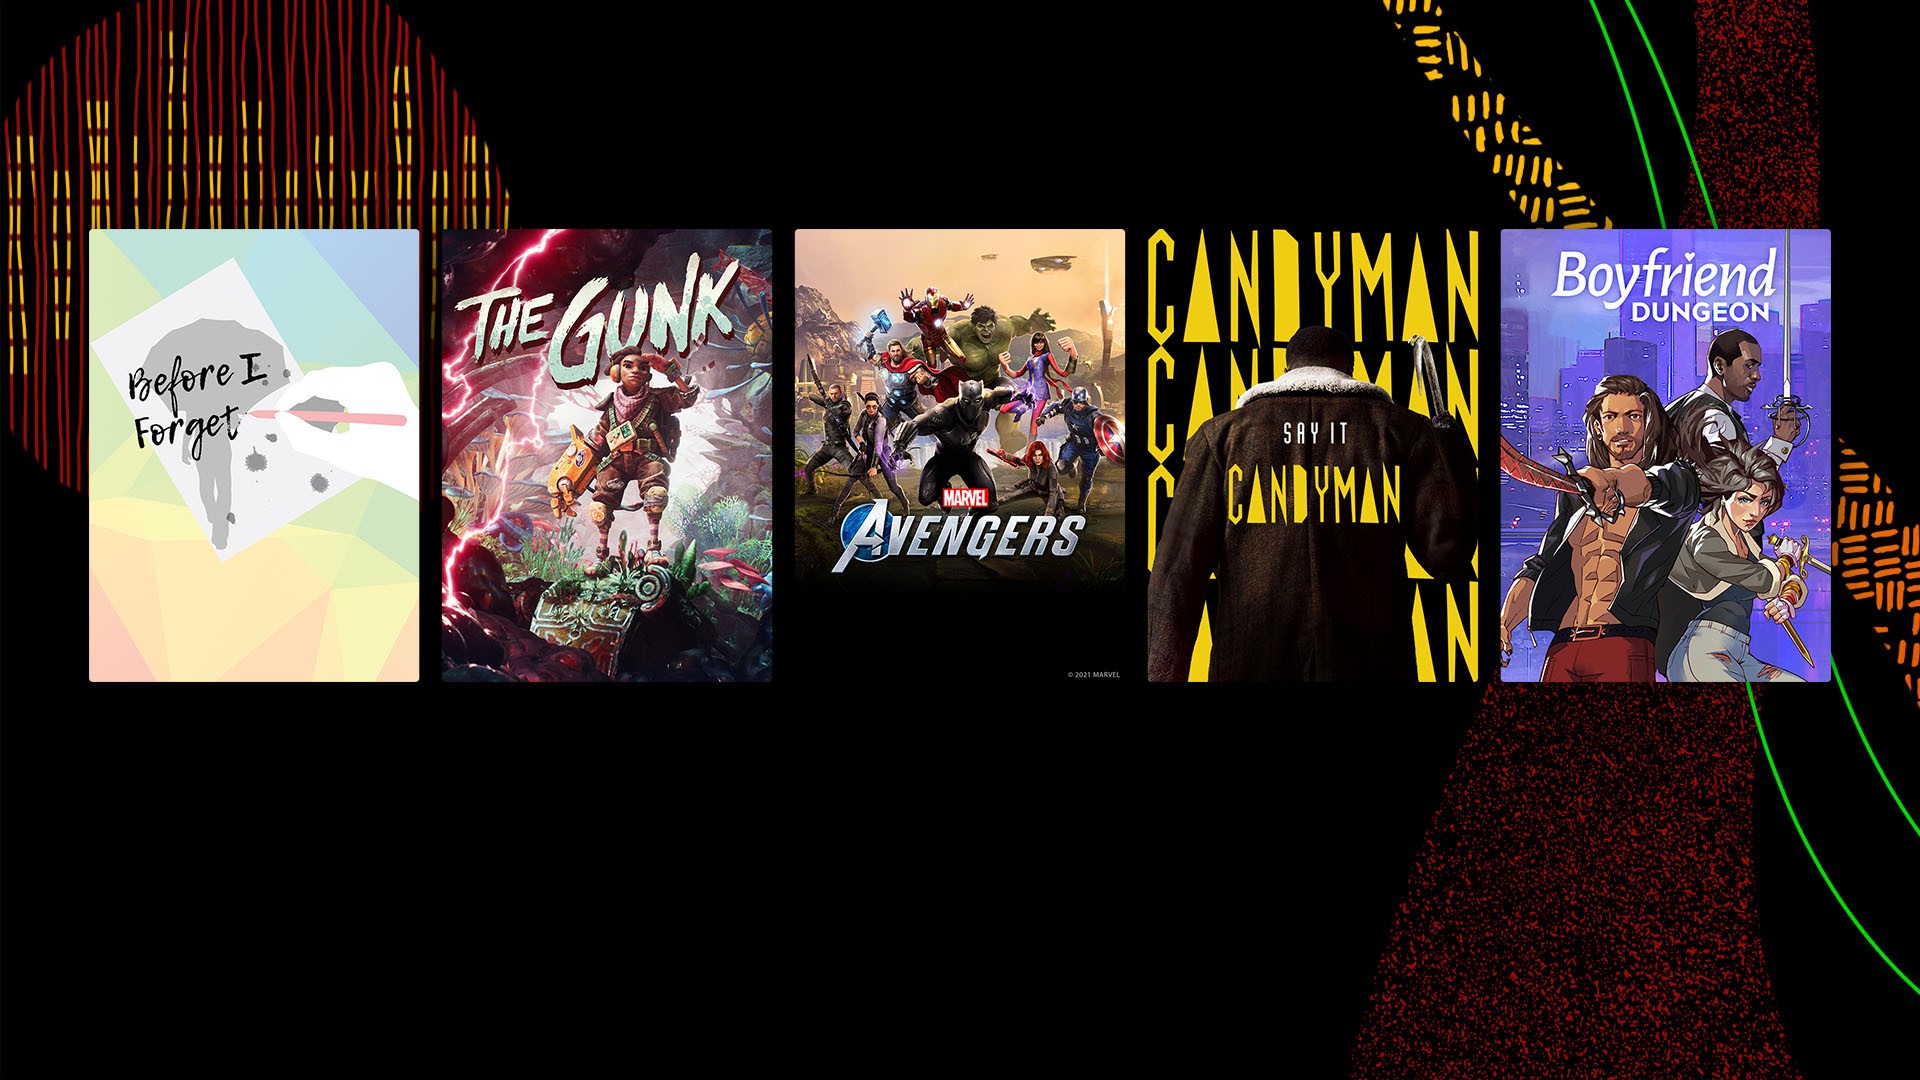 Games and movies including Before I Forget, The Gunk, Marvel's Avengers, Candyman, and Boyfriend Dungeon.